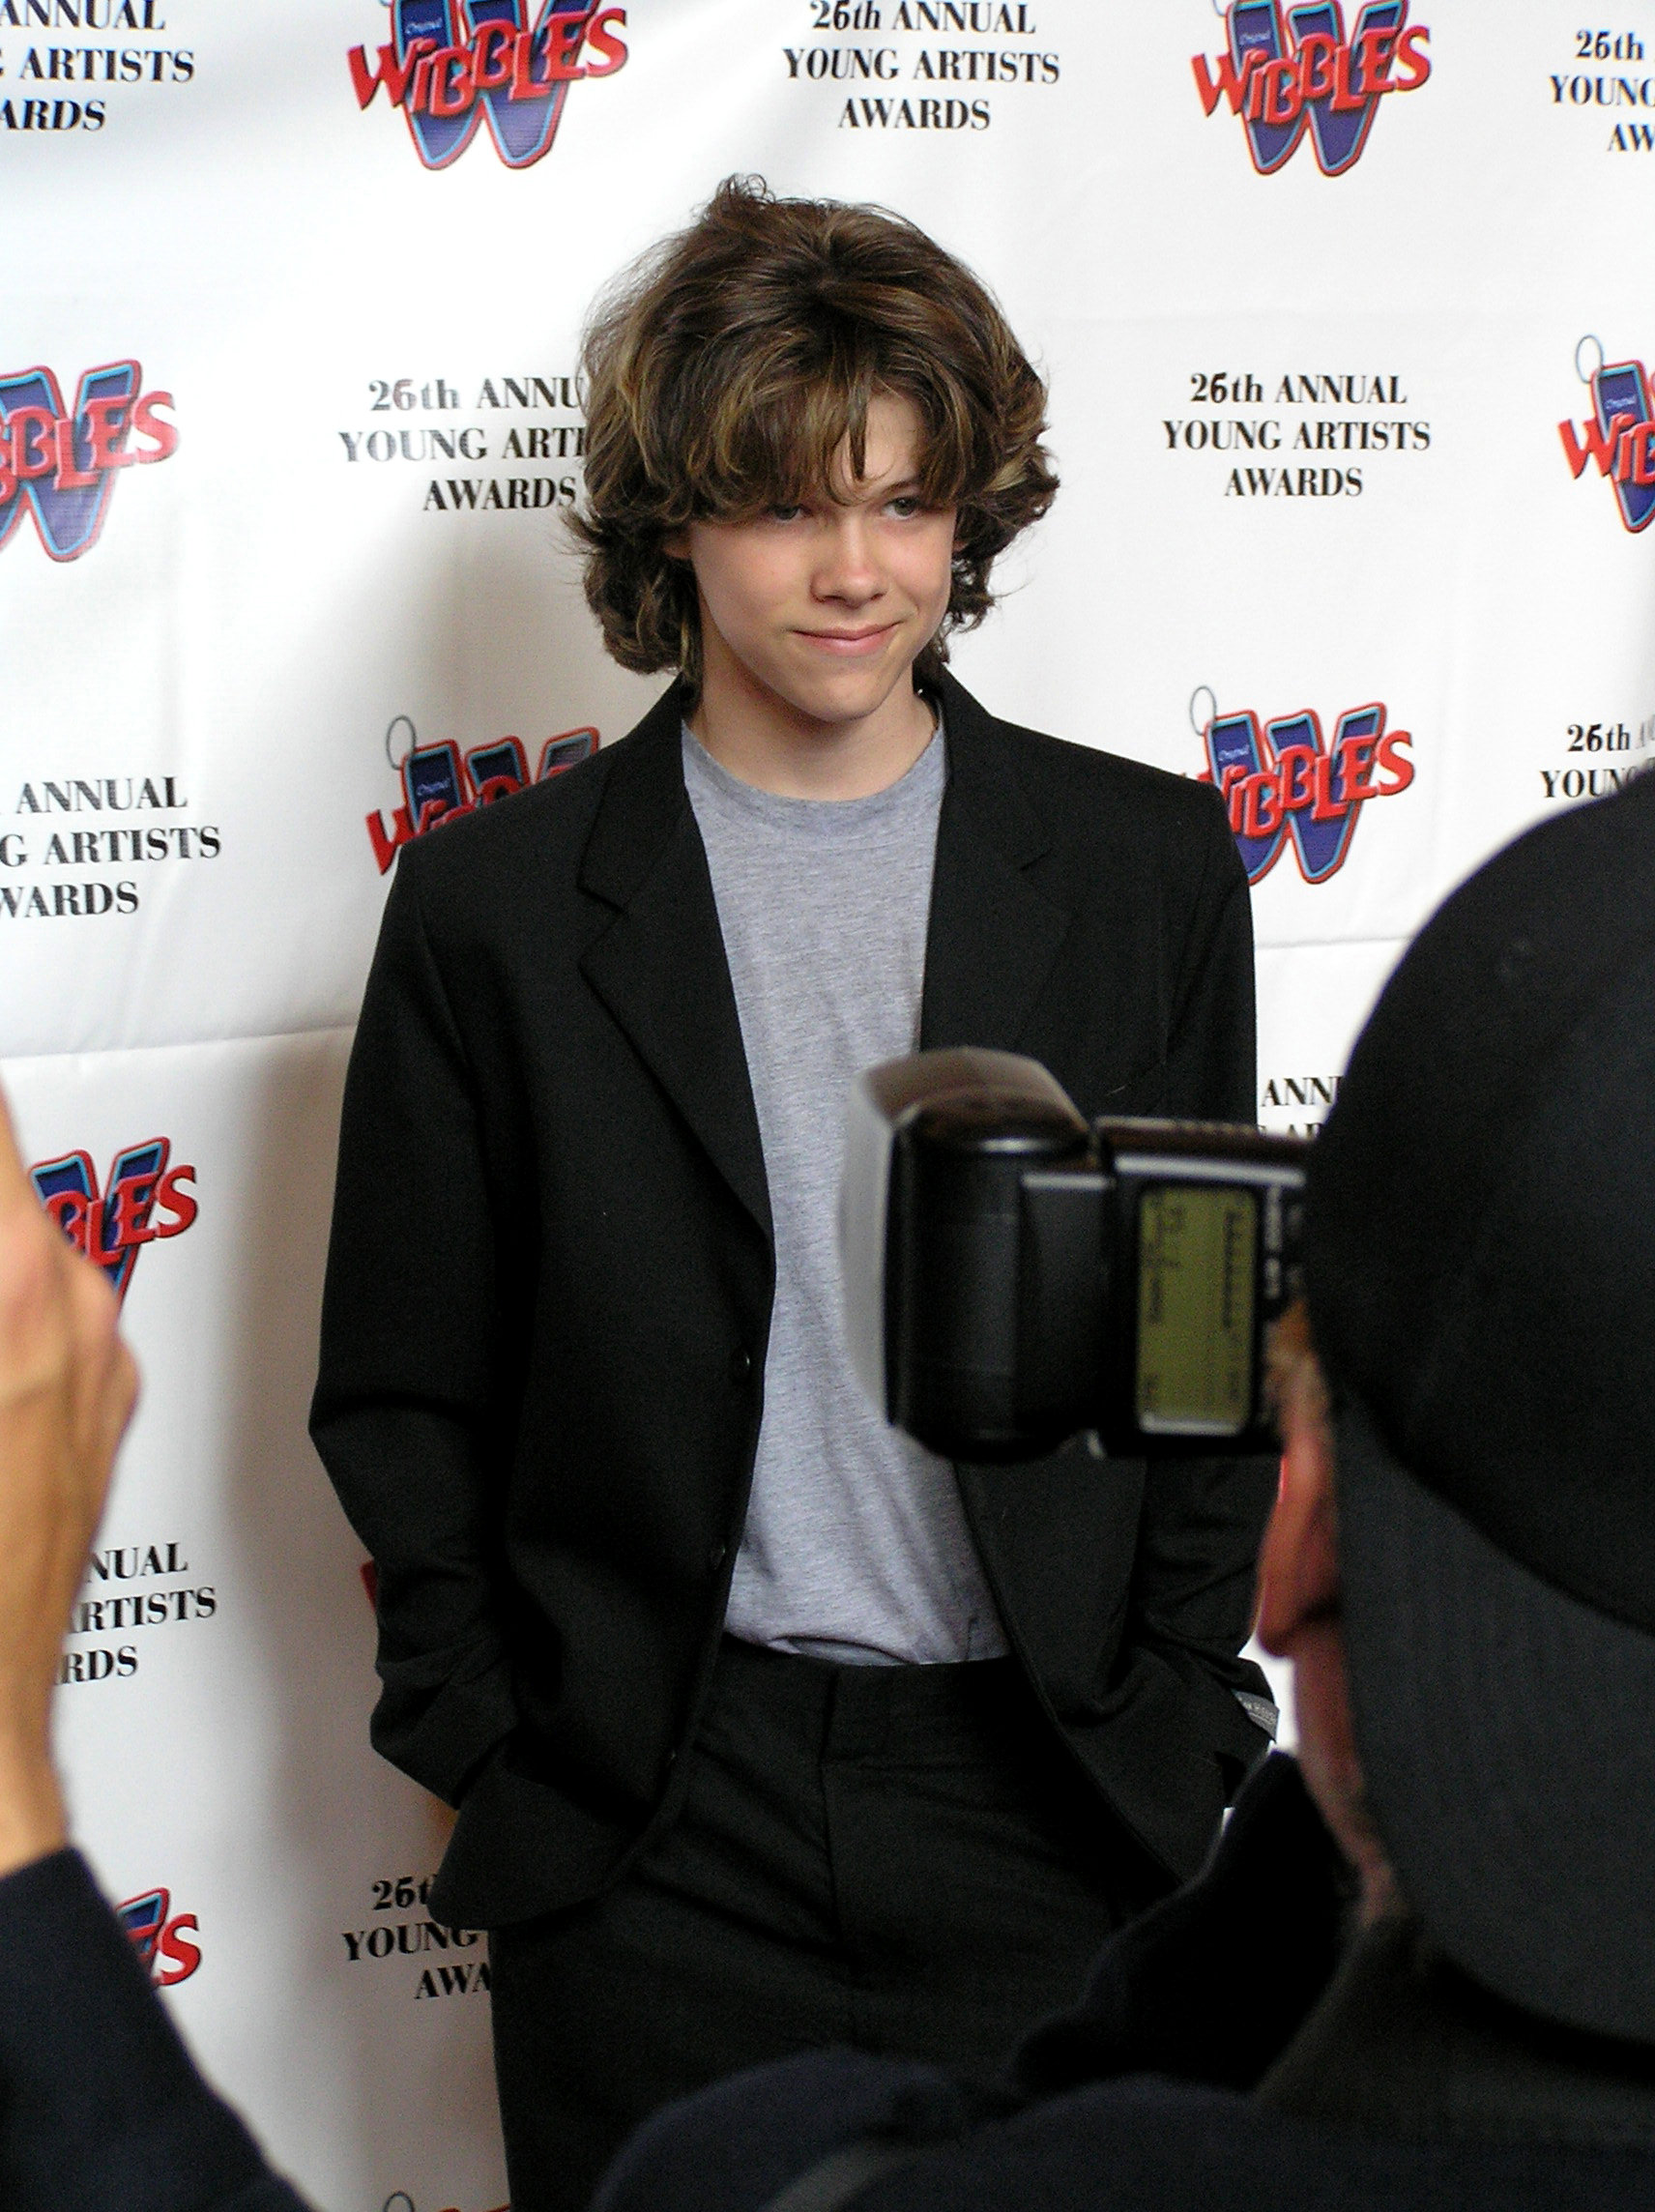 Devon Alan on the Red Carpet as he arrives at the 2005 Young Artists Awards. Photo Date: April 30, 2005